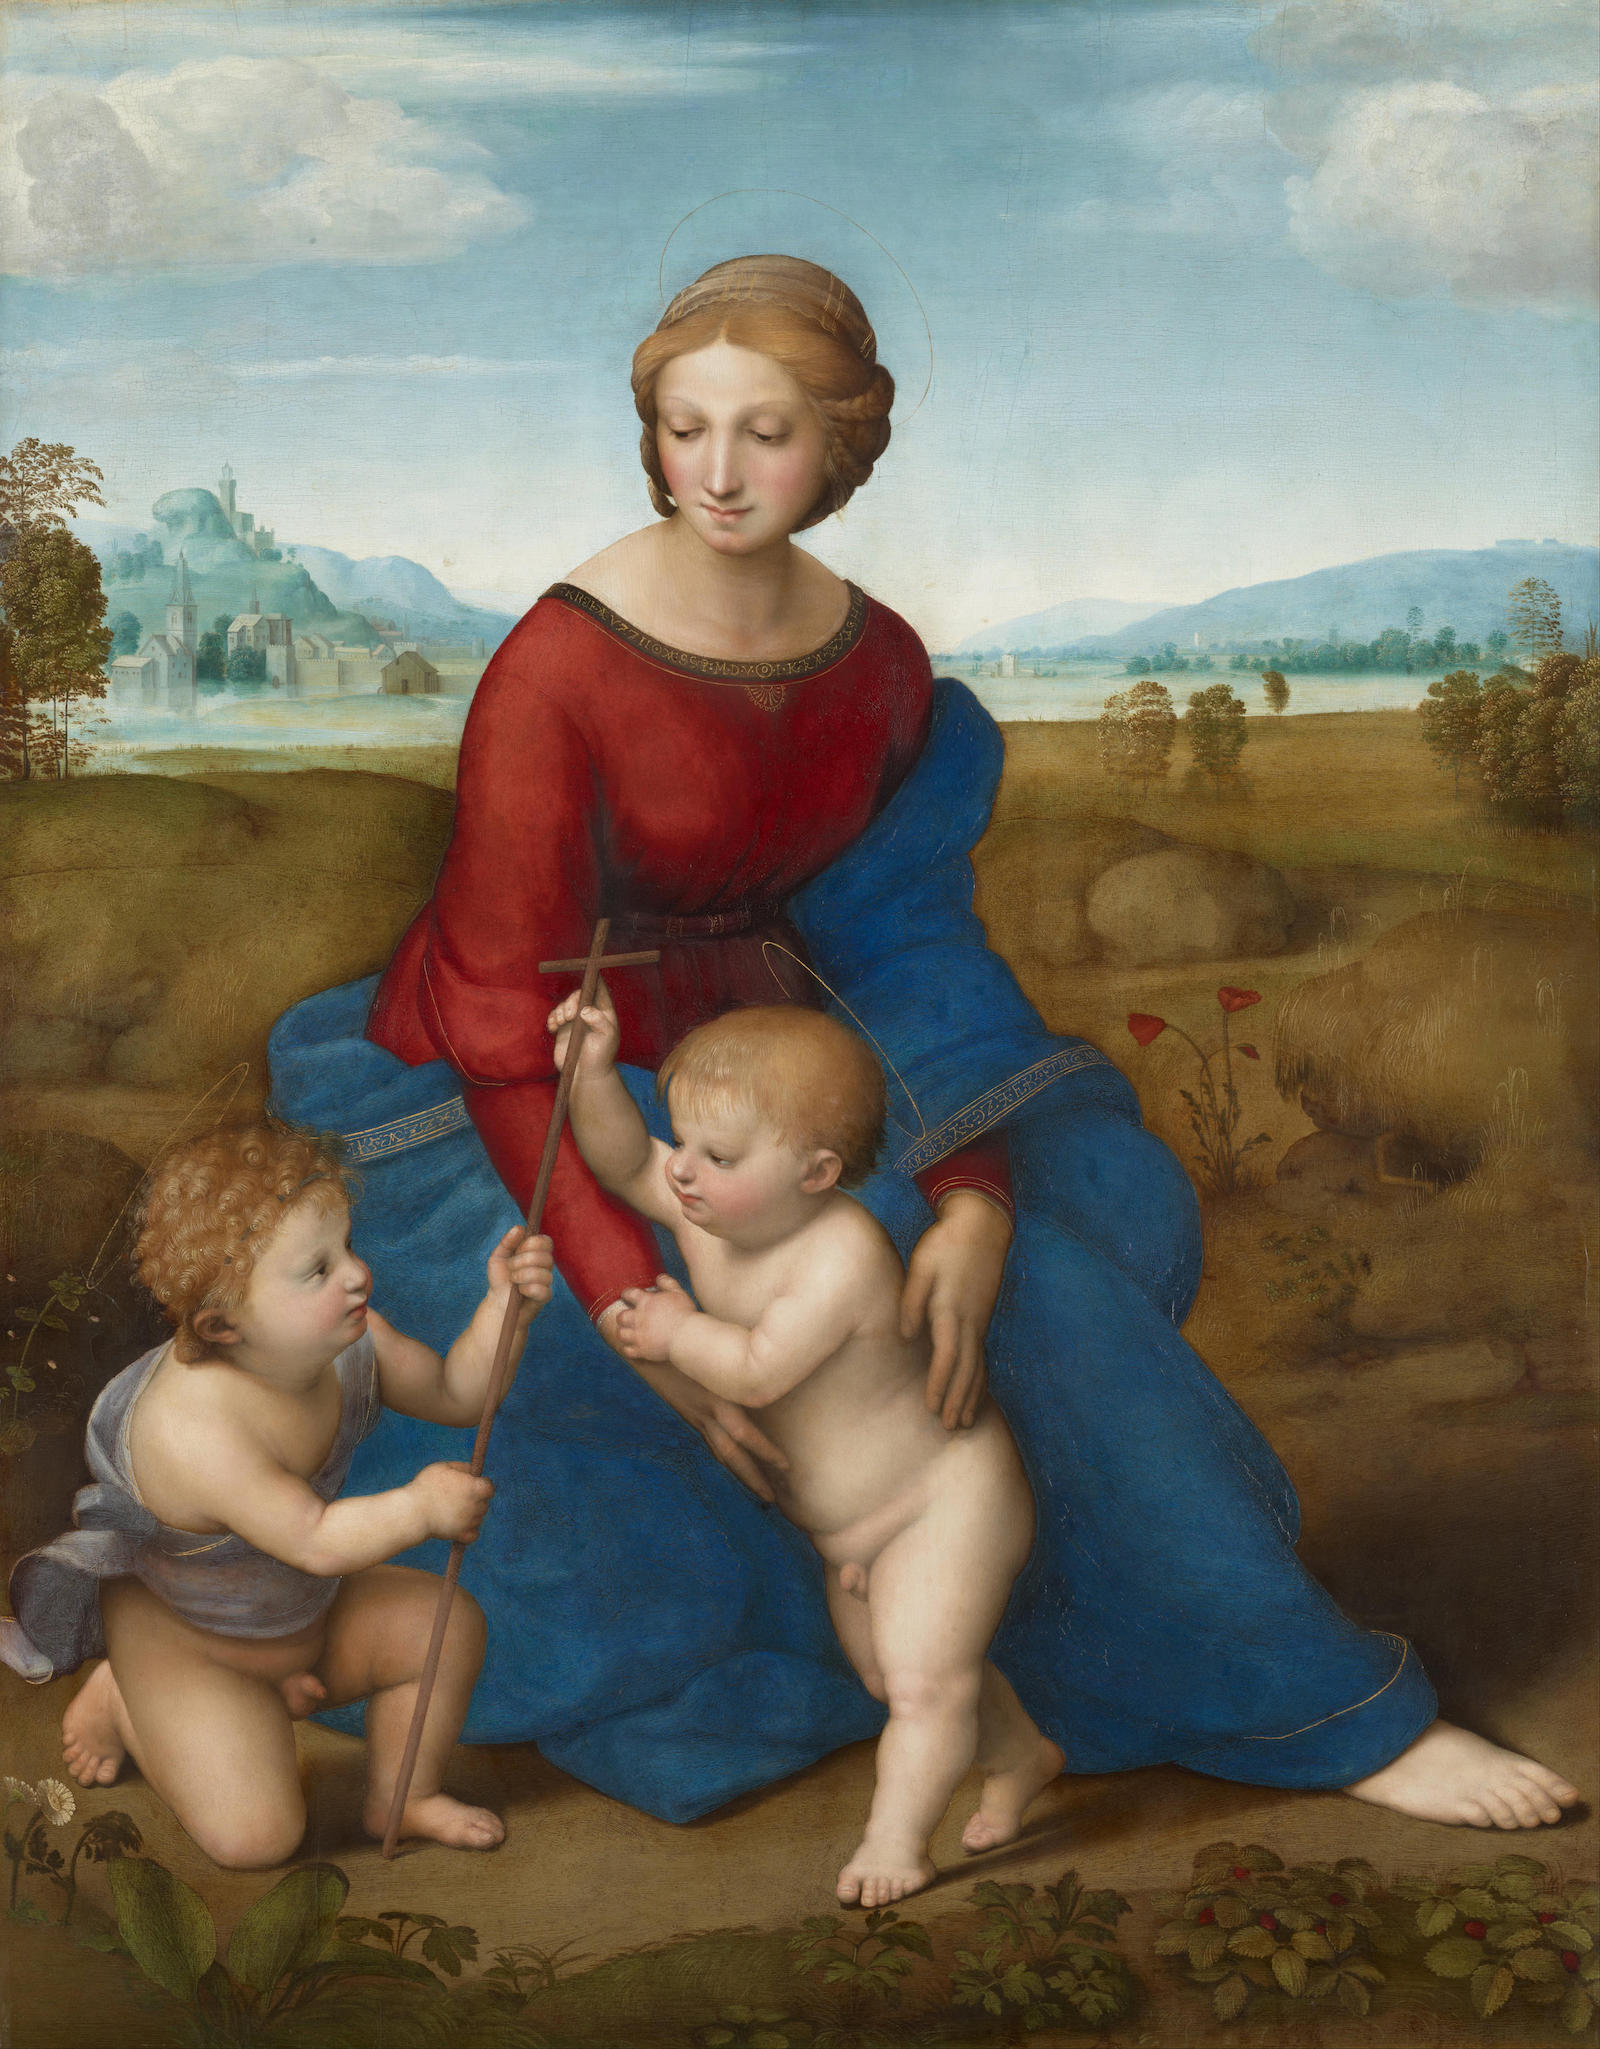 Madonna of the Meadow (Madonna with the Christ Child and Saint John the Baptist), by Raphael, 1506. Art Library/Alamy Stock Photo.